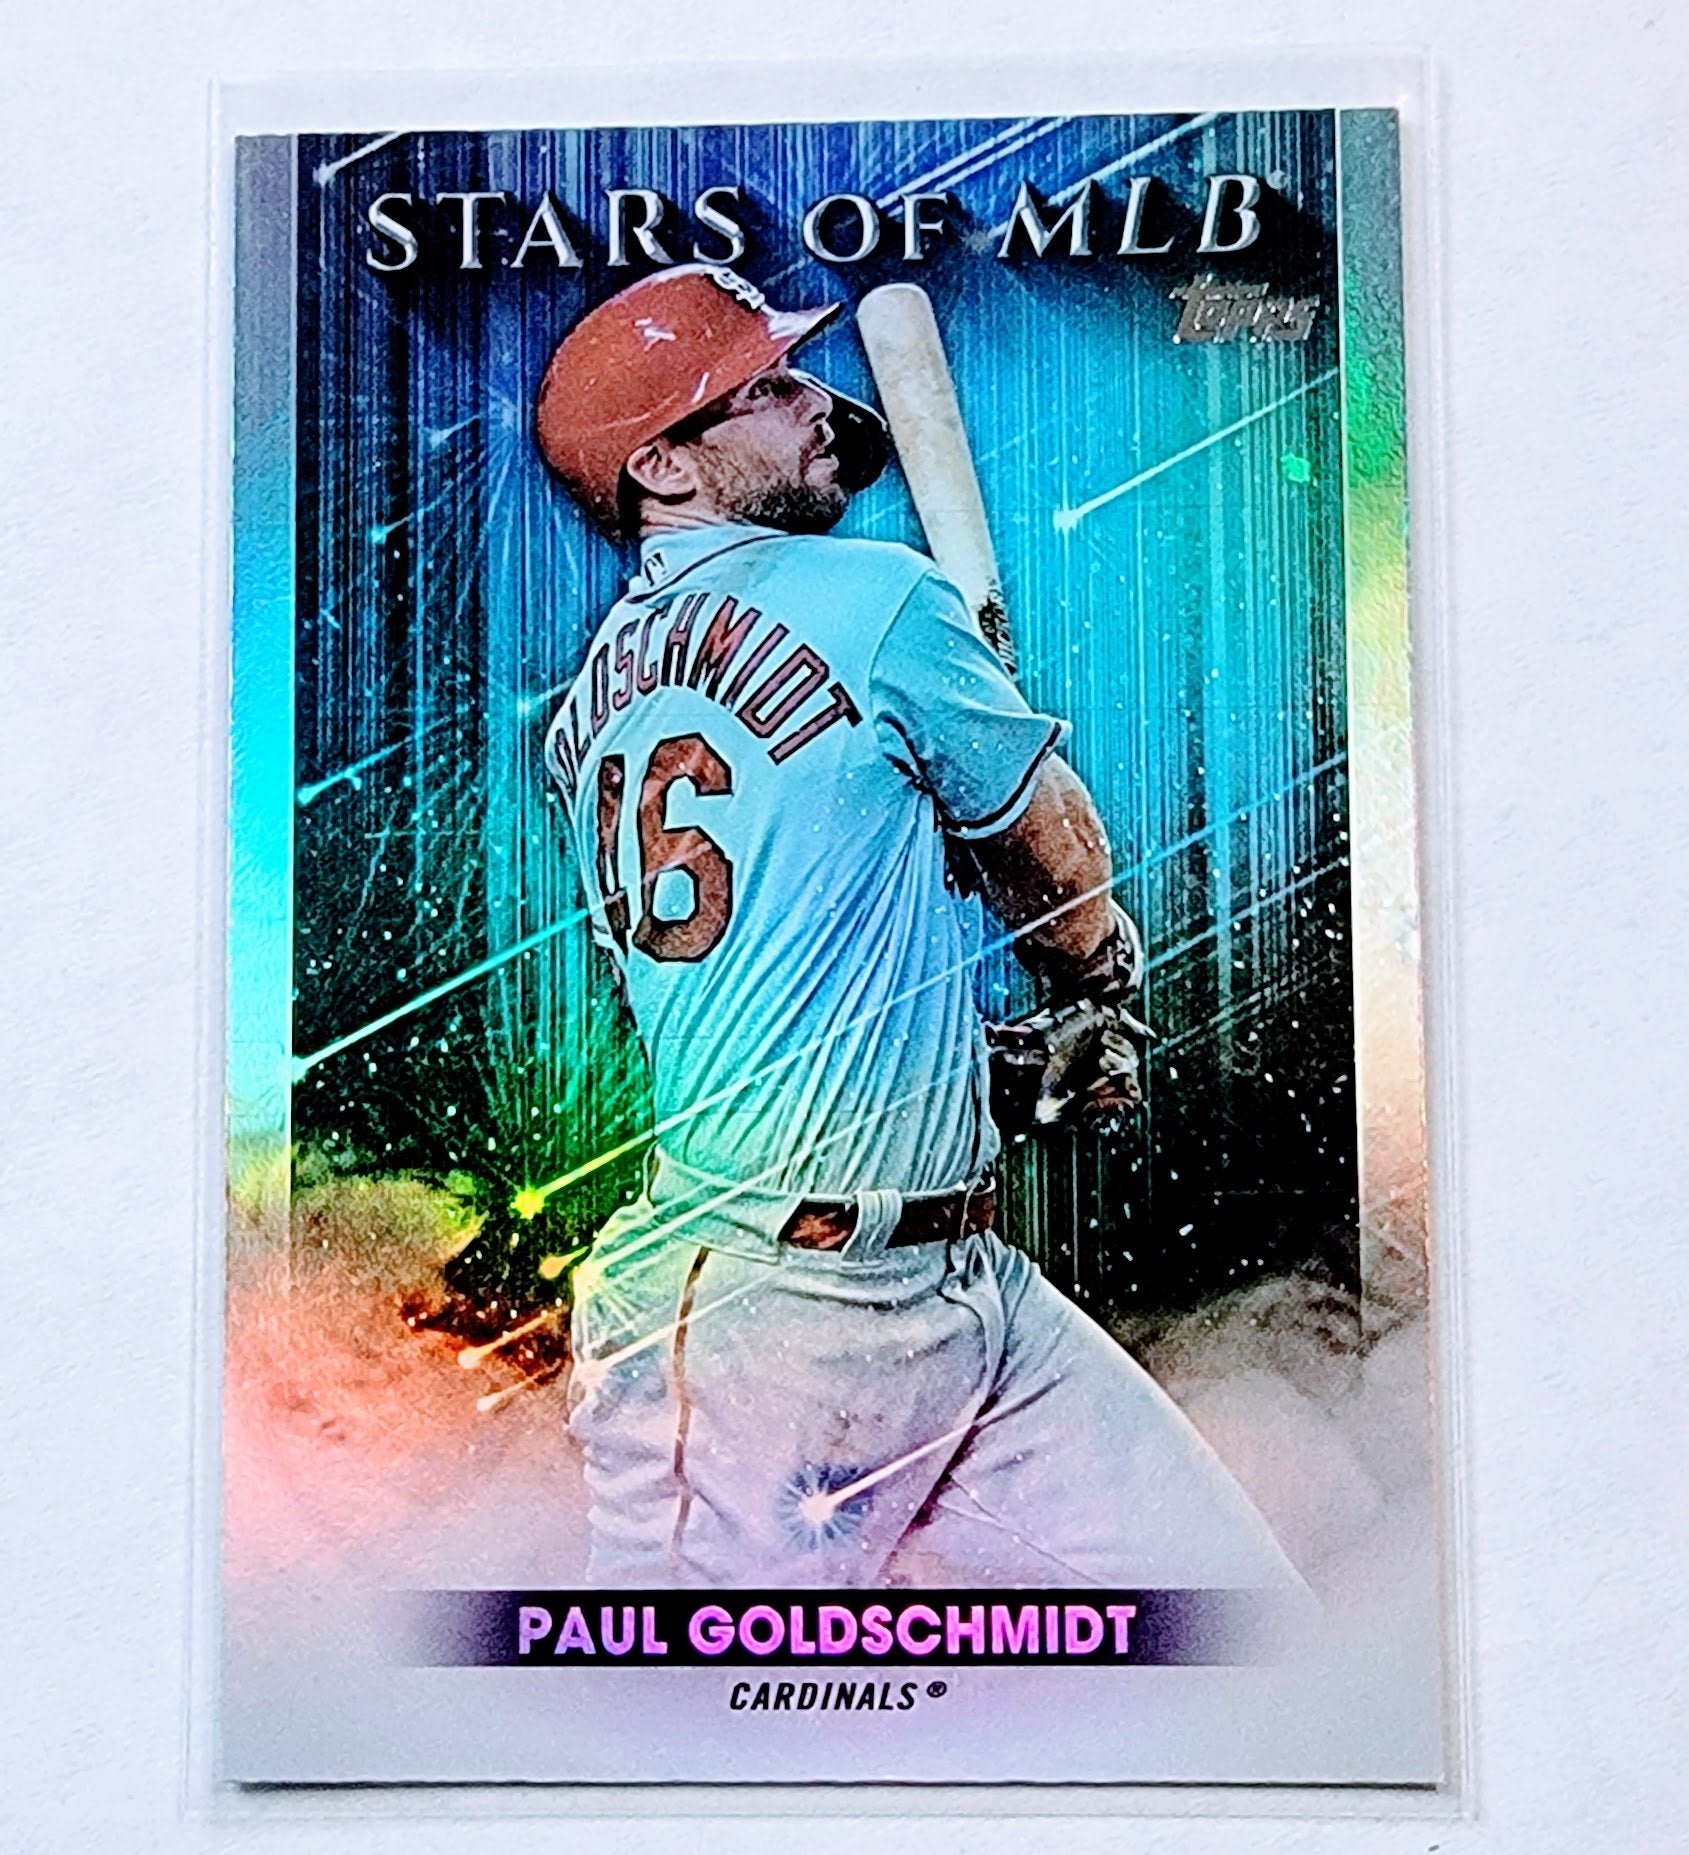 2022 Topps Paul Goldschmidt Stars of the MLB Foil Refractor Baseball Card AVM1 simple Xclusive Collectibles   